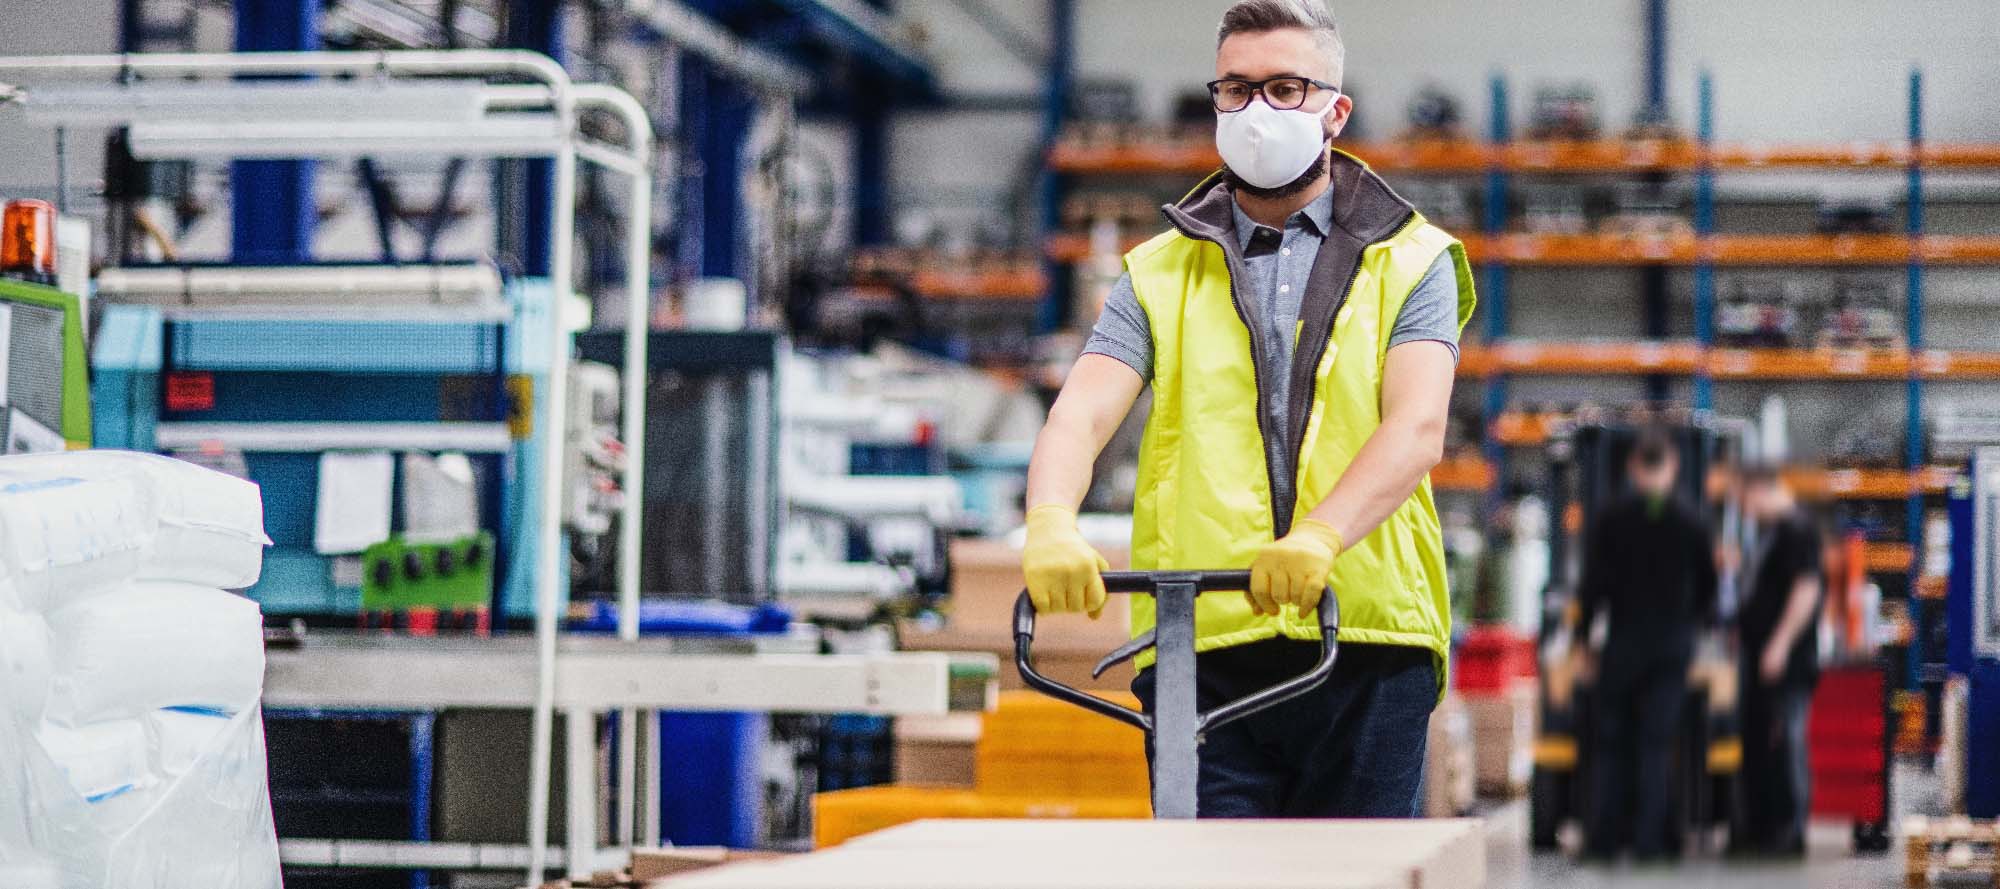 Male warehouse employee moving inventory while wearing a medical mask